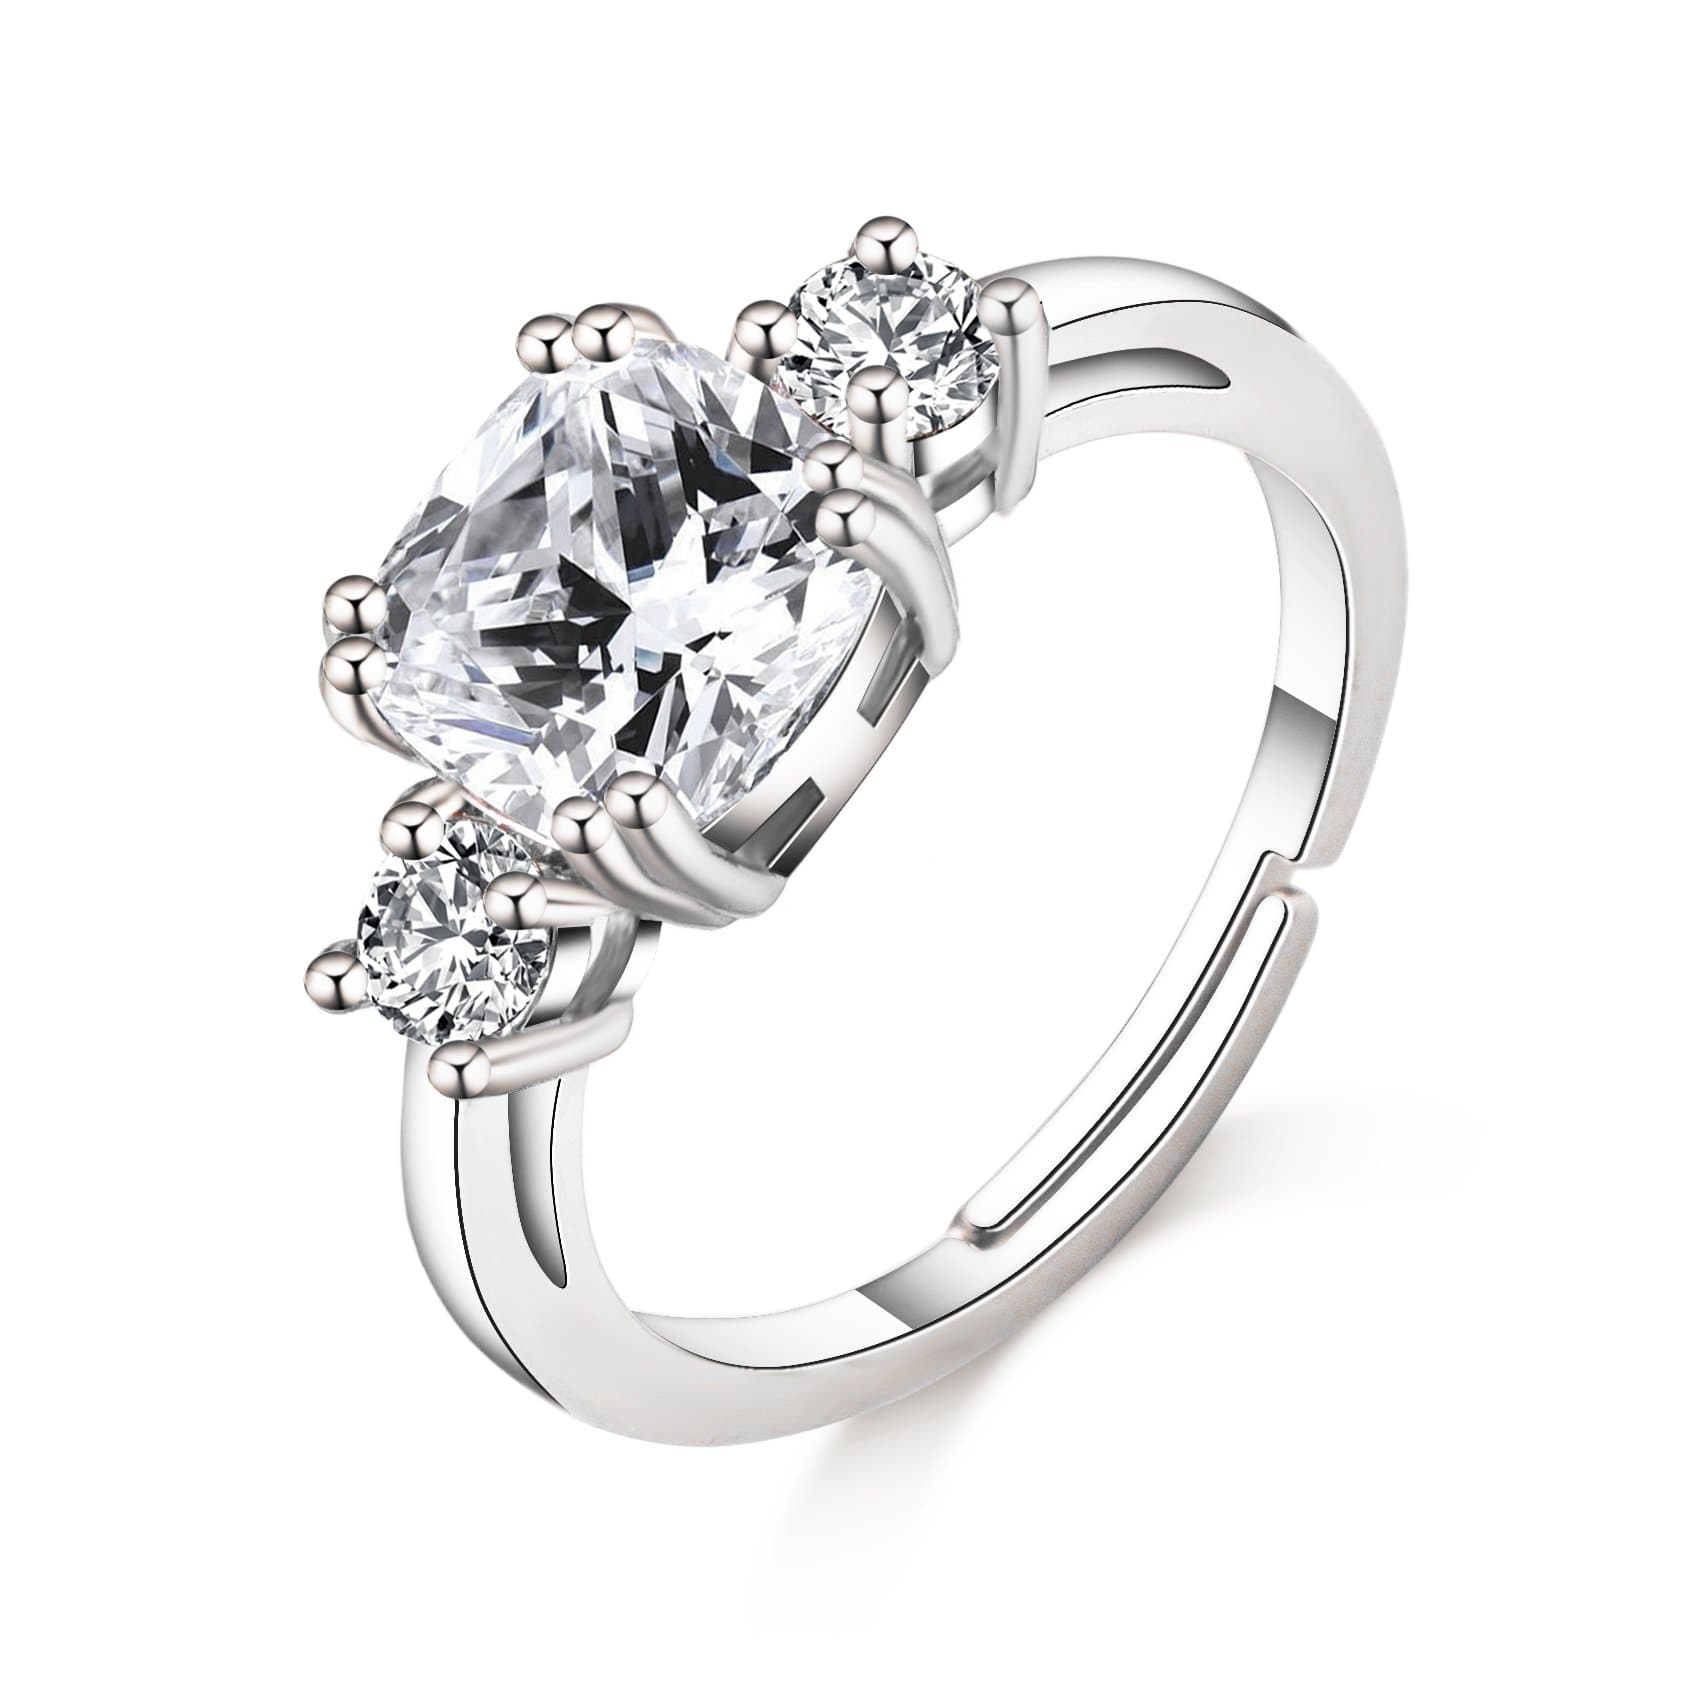 Silver Plated Three Stone Ring Created with Zircondia® Crystals